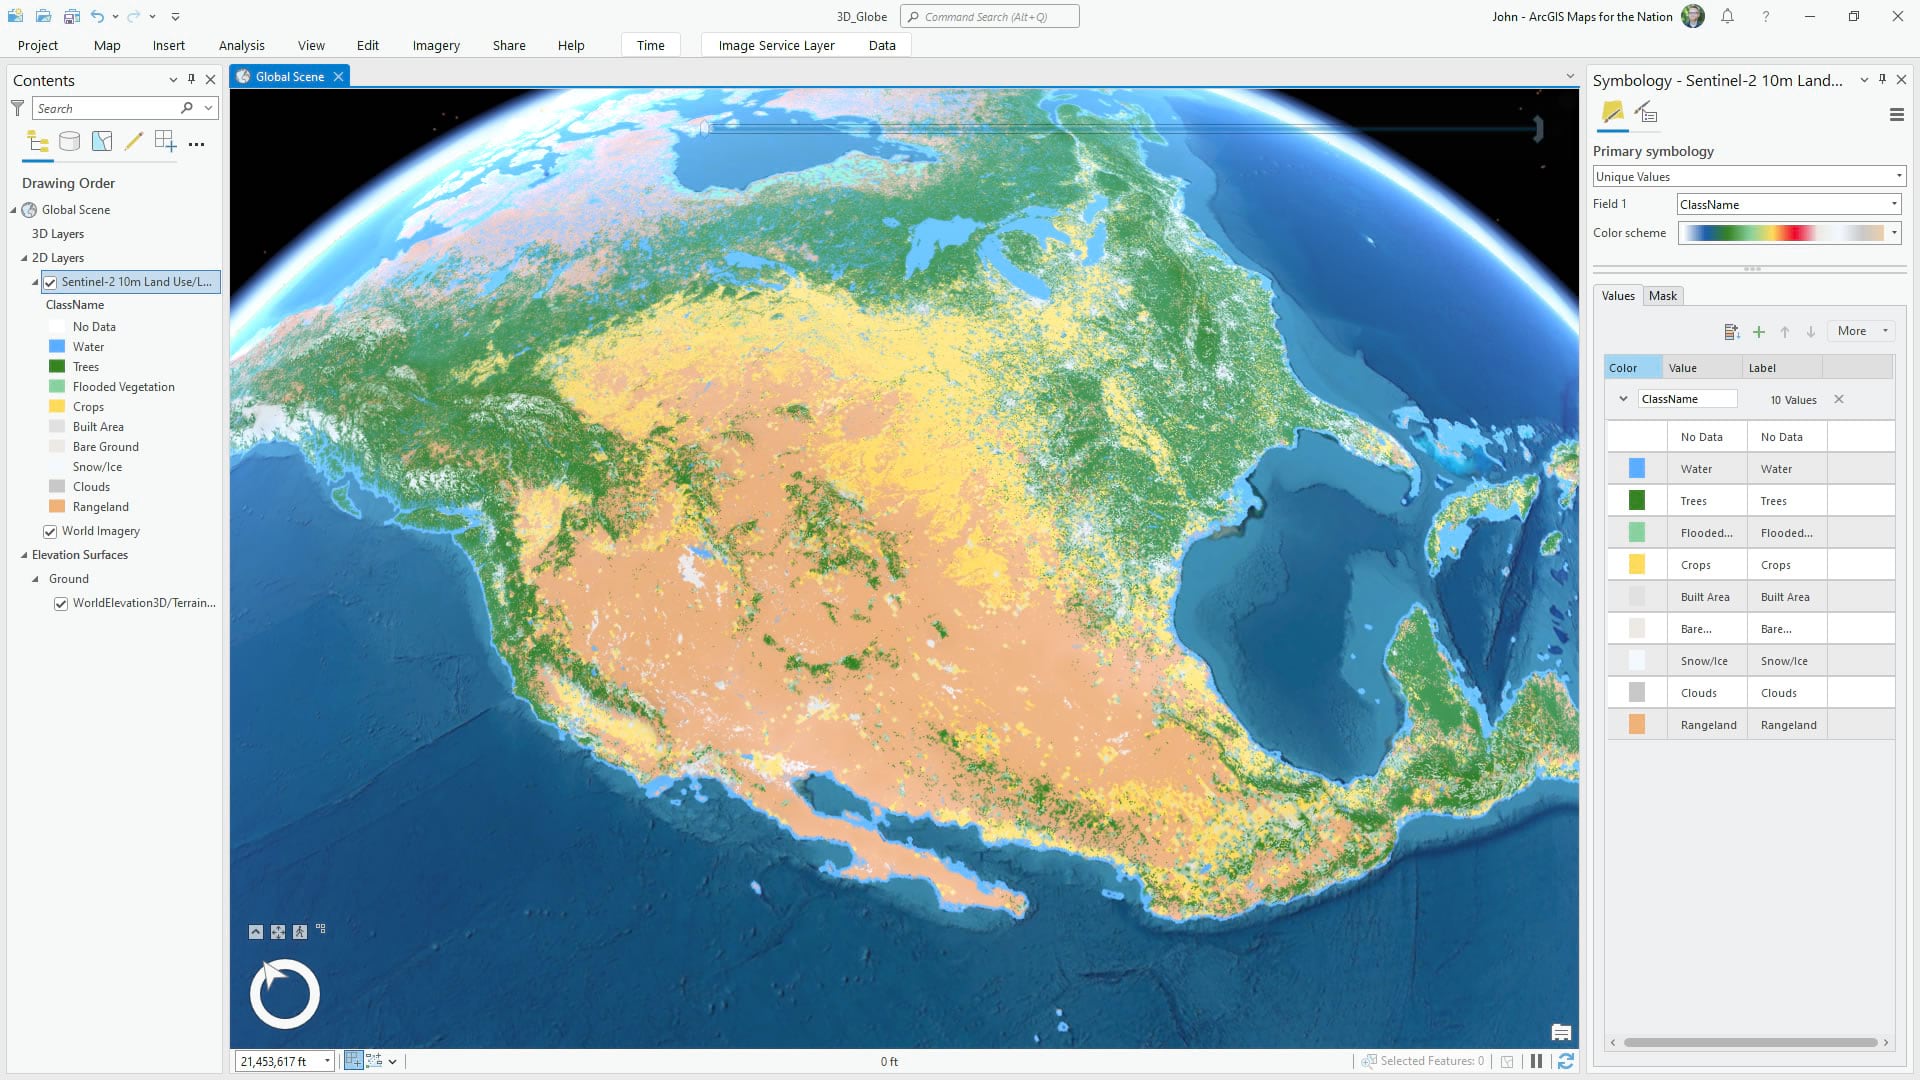 Creating a 3D globe in ArcGIS Pro: Land use imagery with updated color symbology